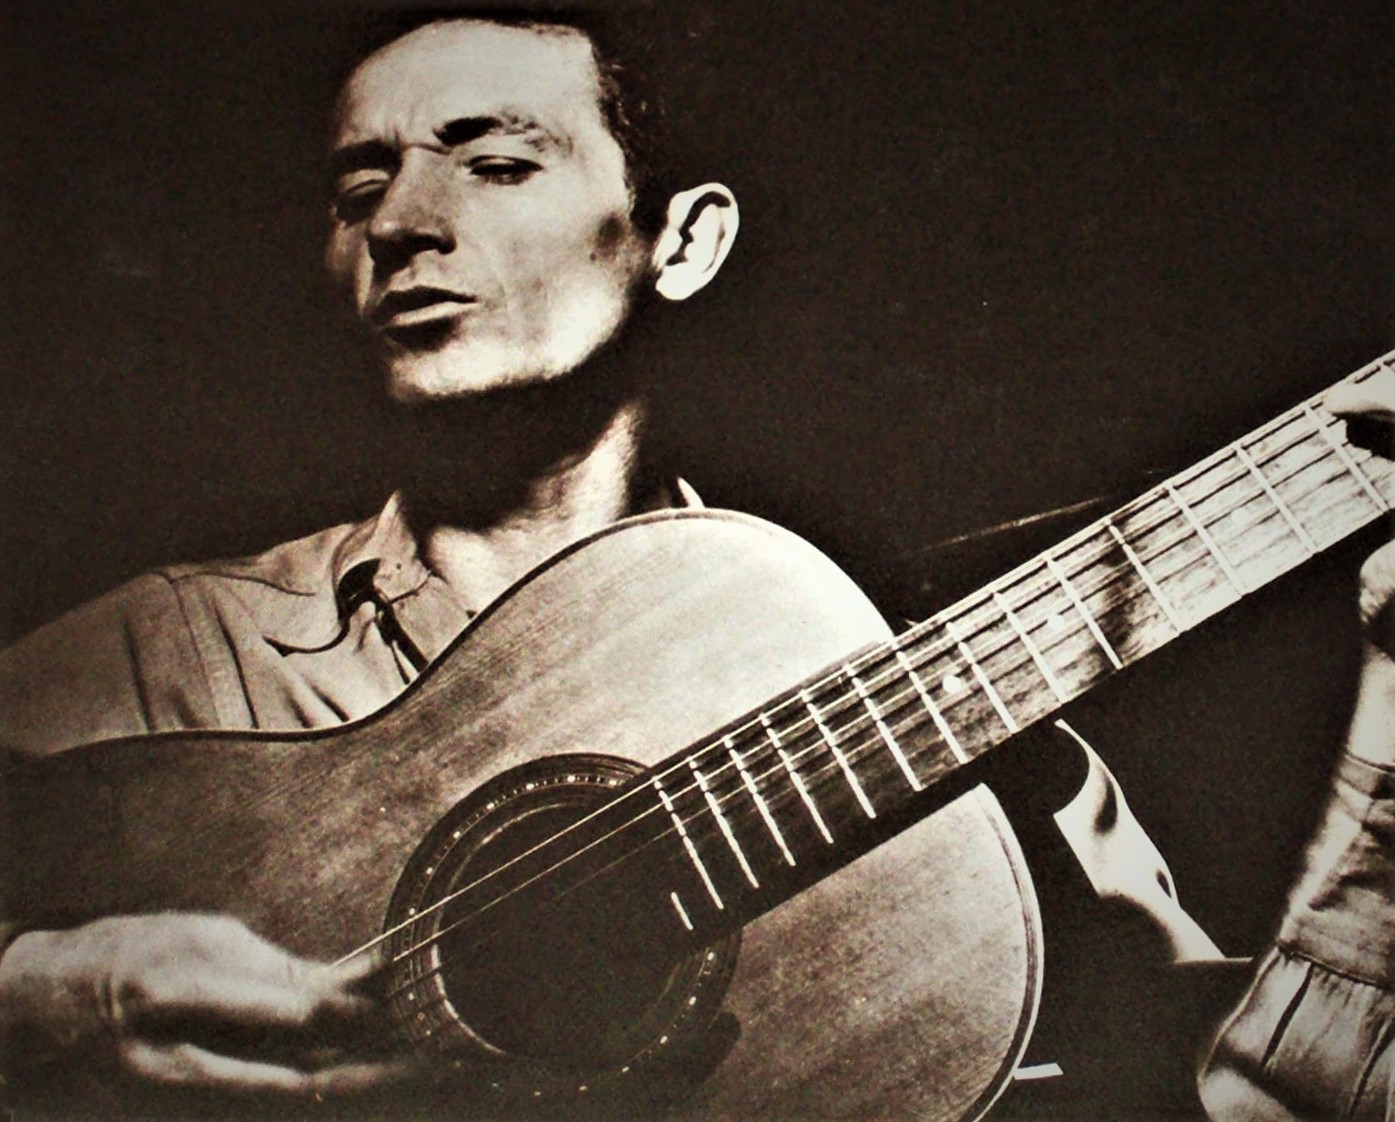 Woody Guthrie: Singing The Songs of the People - American Songwriter